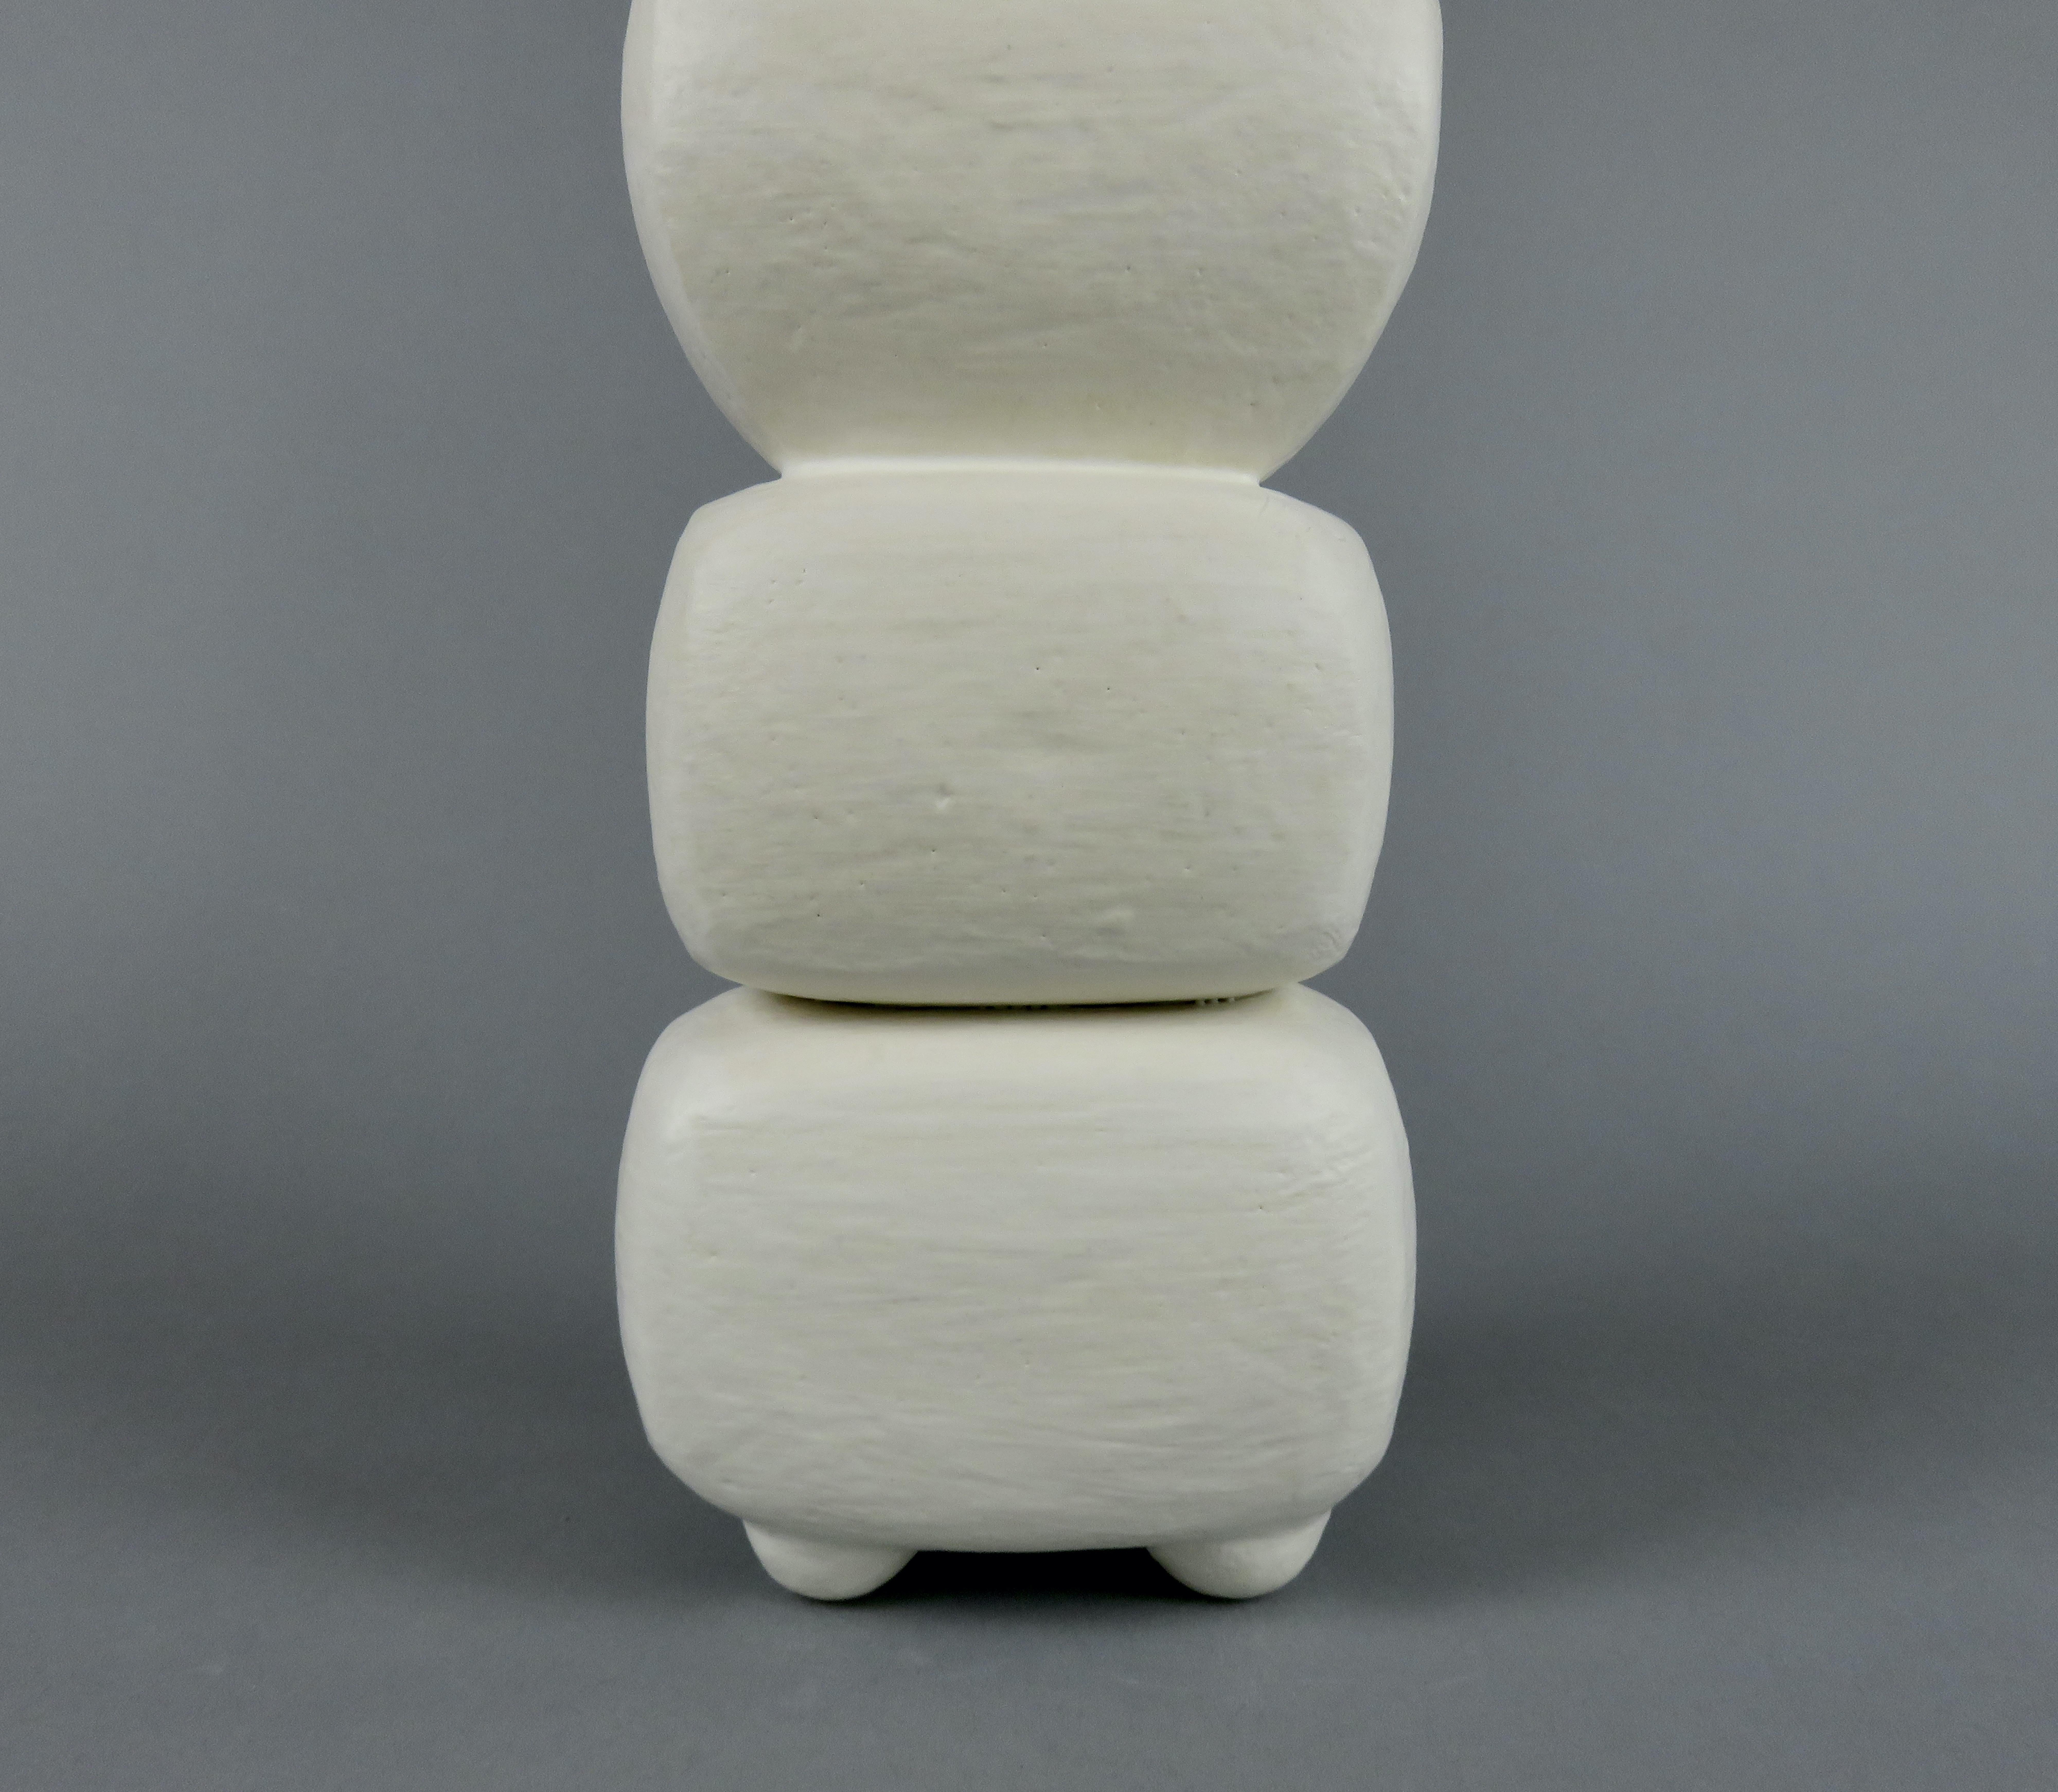 Creamy White 3-Part Totem, Rectangular Cup on Top, Hand Built Ceramic Sculpture For Sale 6